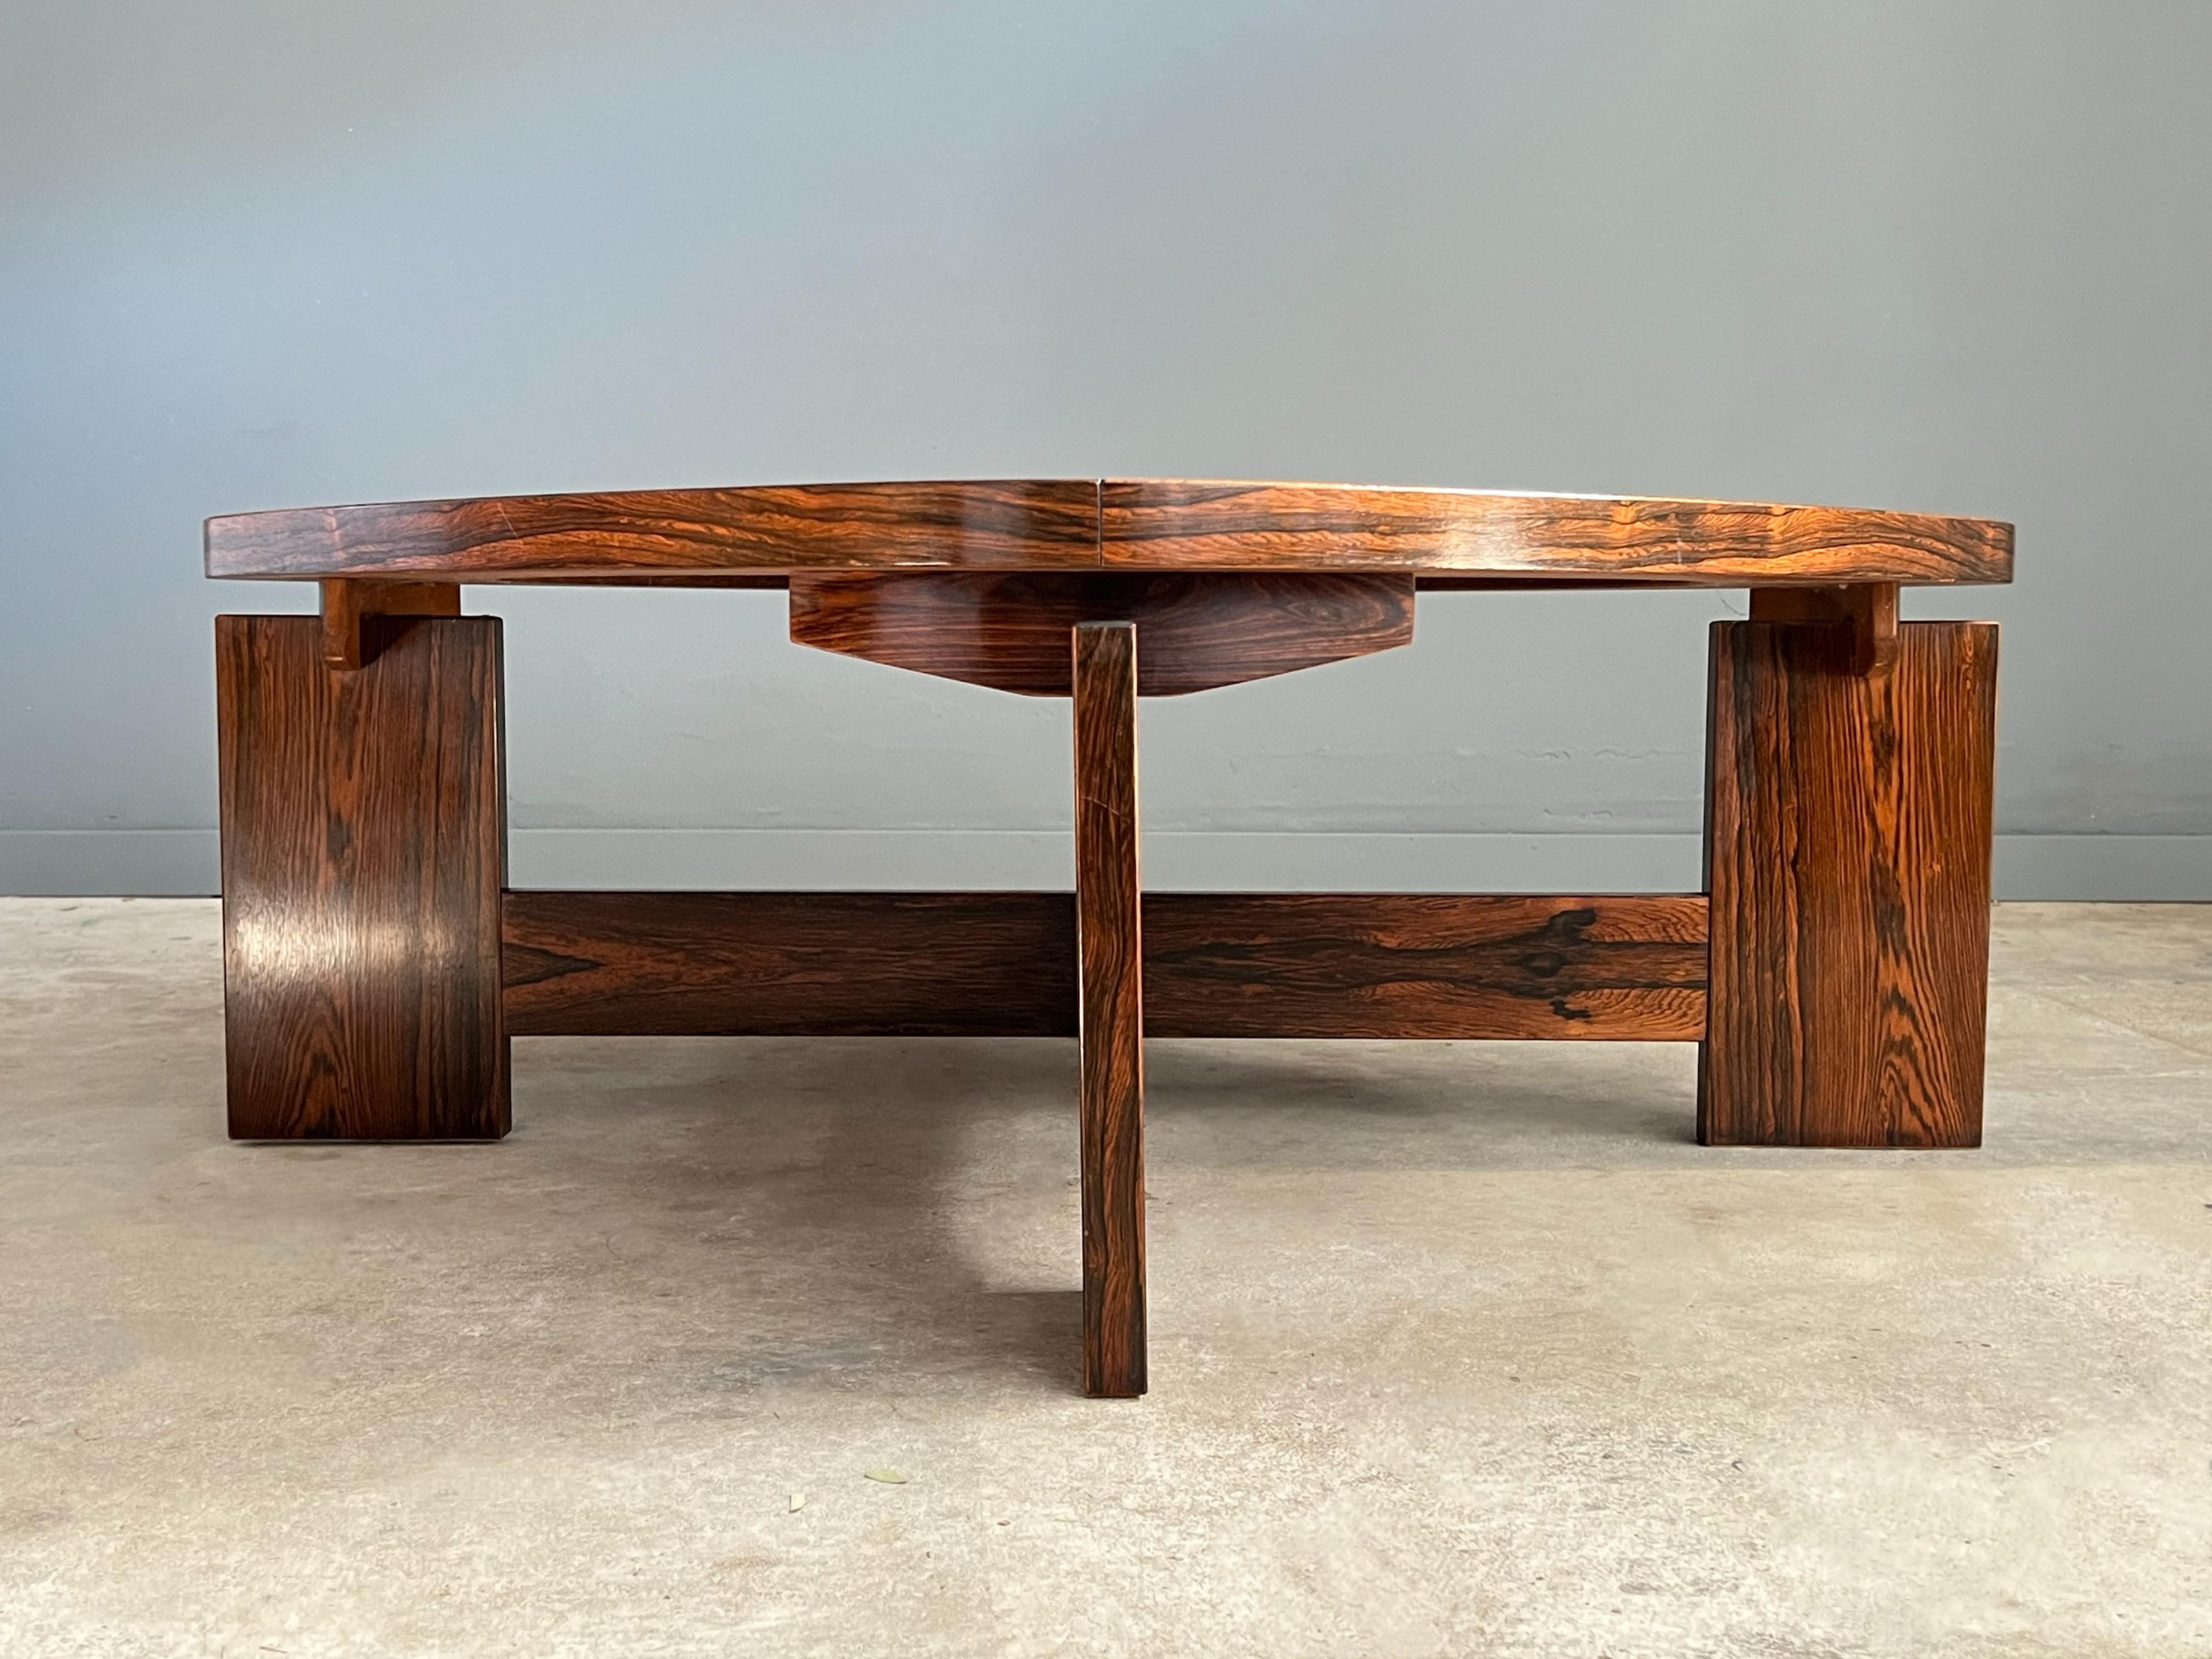 Late 20th Century Brazilian Rosewood and Tile Coffee Table Attributed to Tue Poulsen